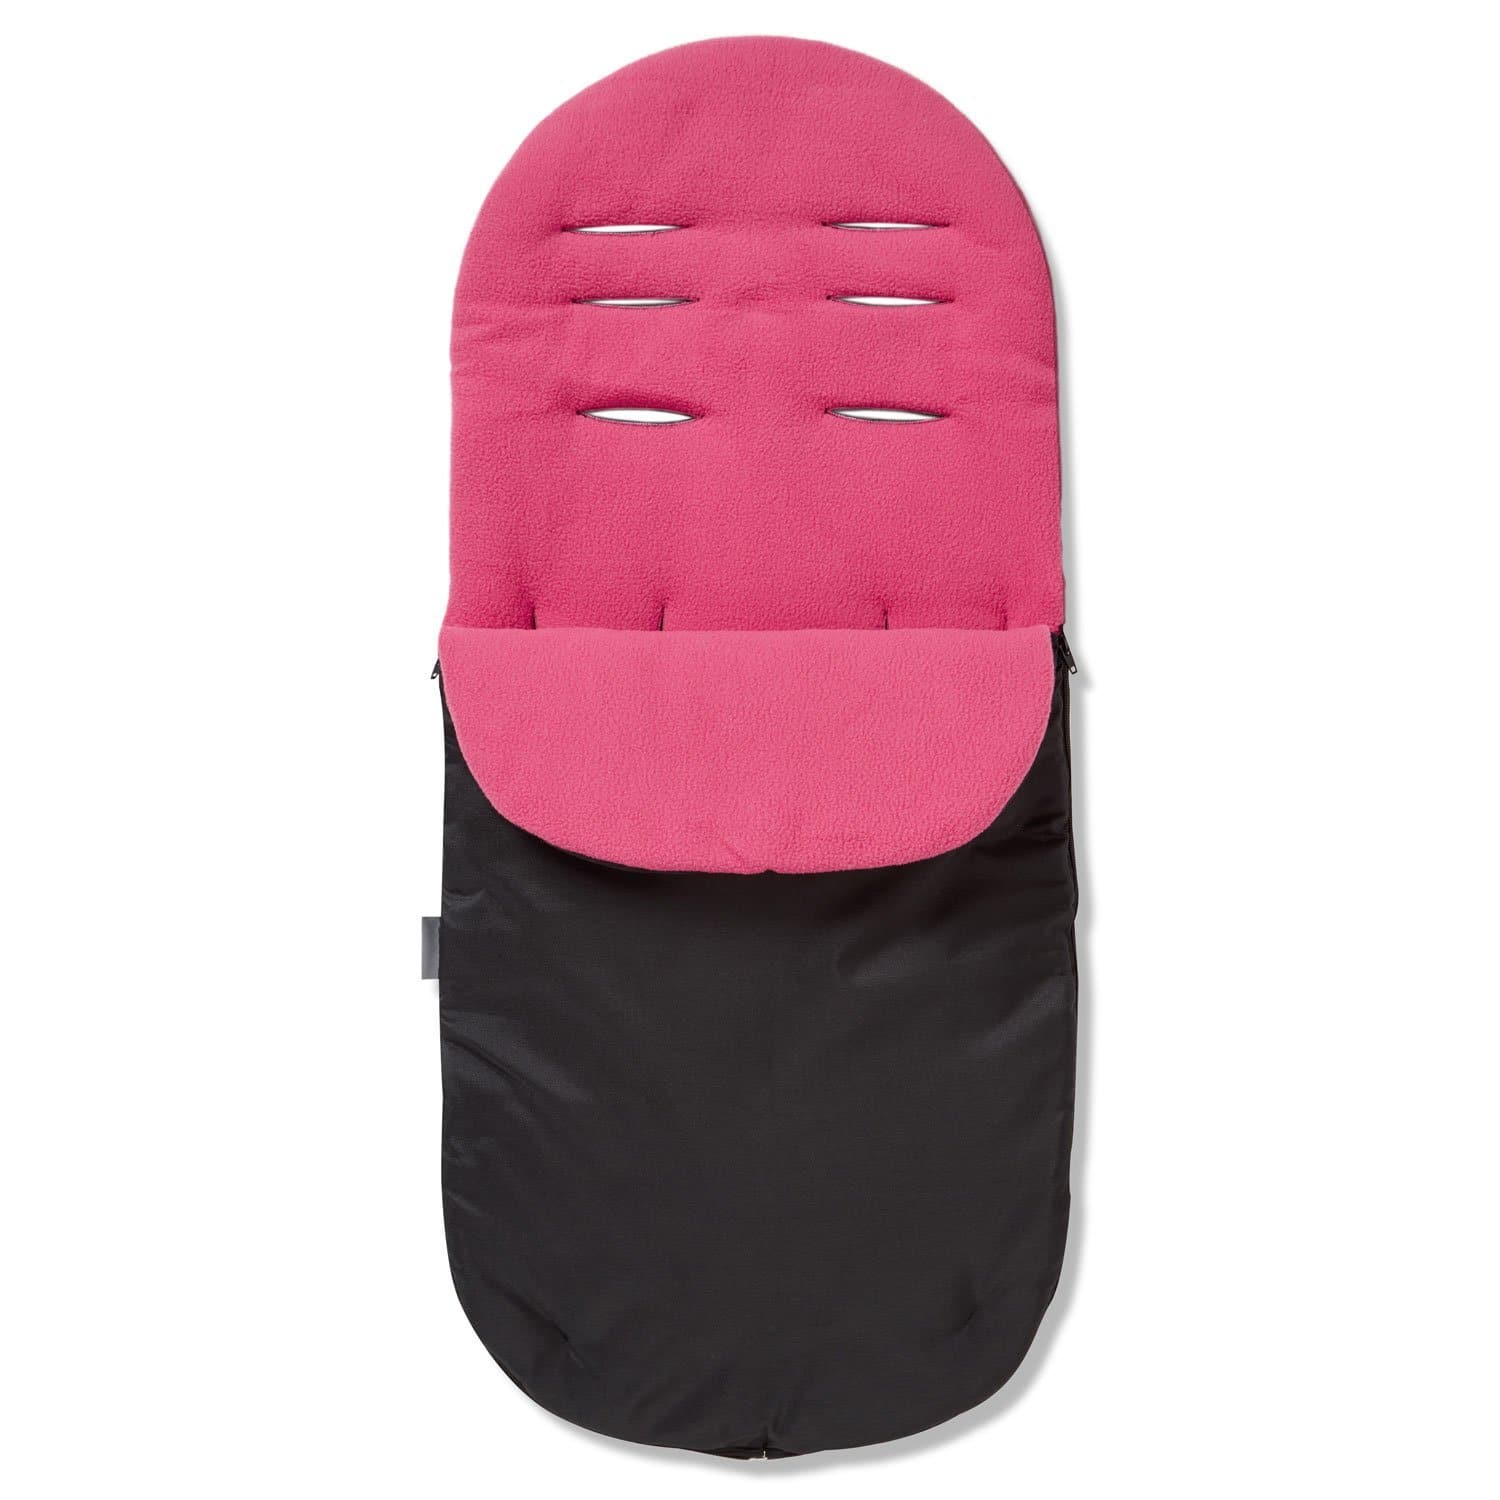 Footmuff / Cosy Toes Compatible with Teutonia - For Your Little One